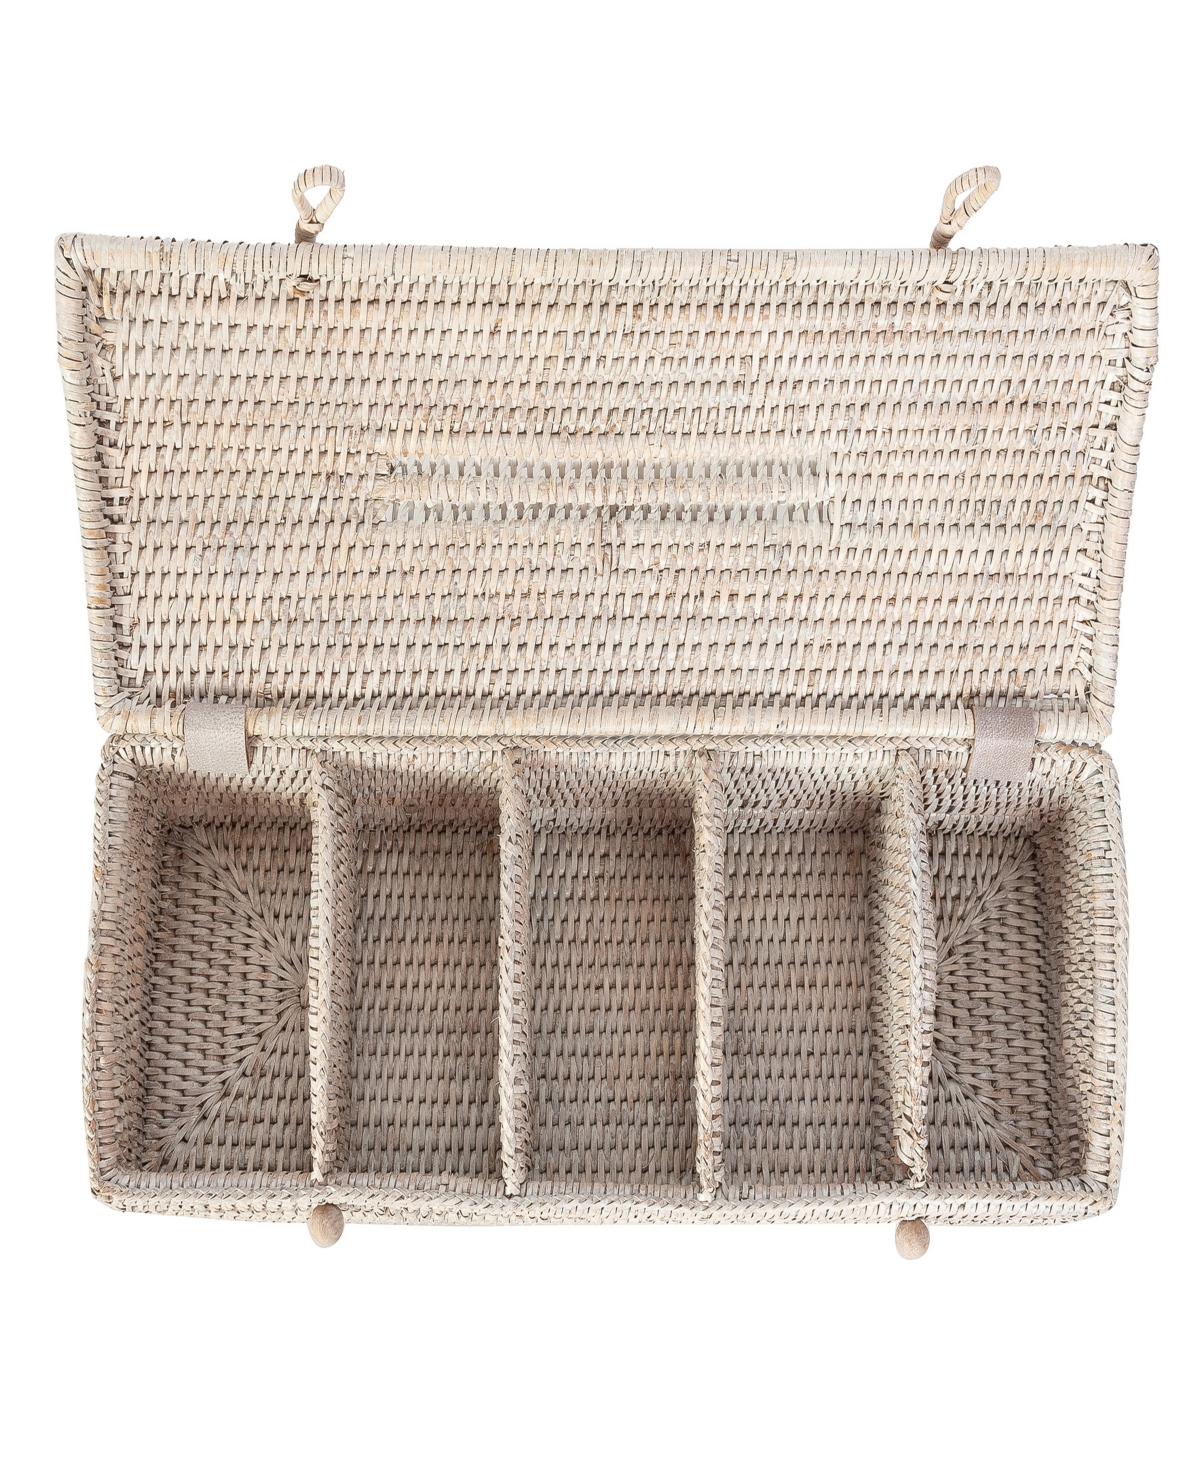 Artifacts Trading Company Rattan 5 Section Tea Box With Lid In White Wash